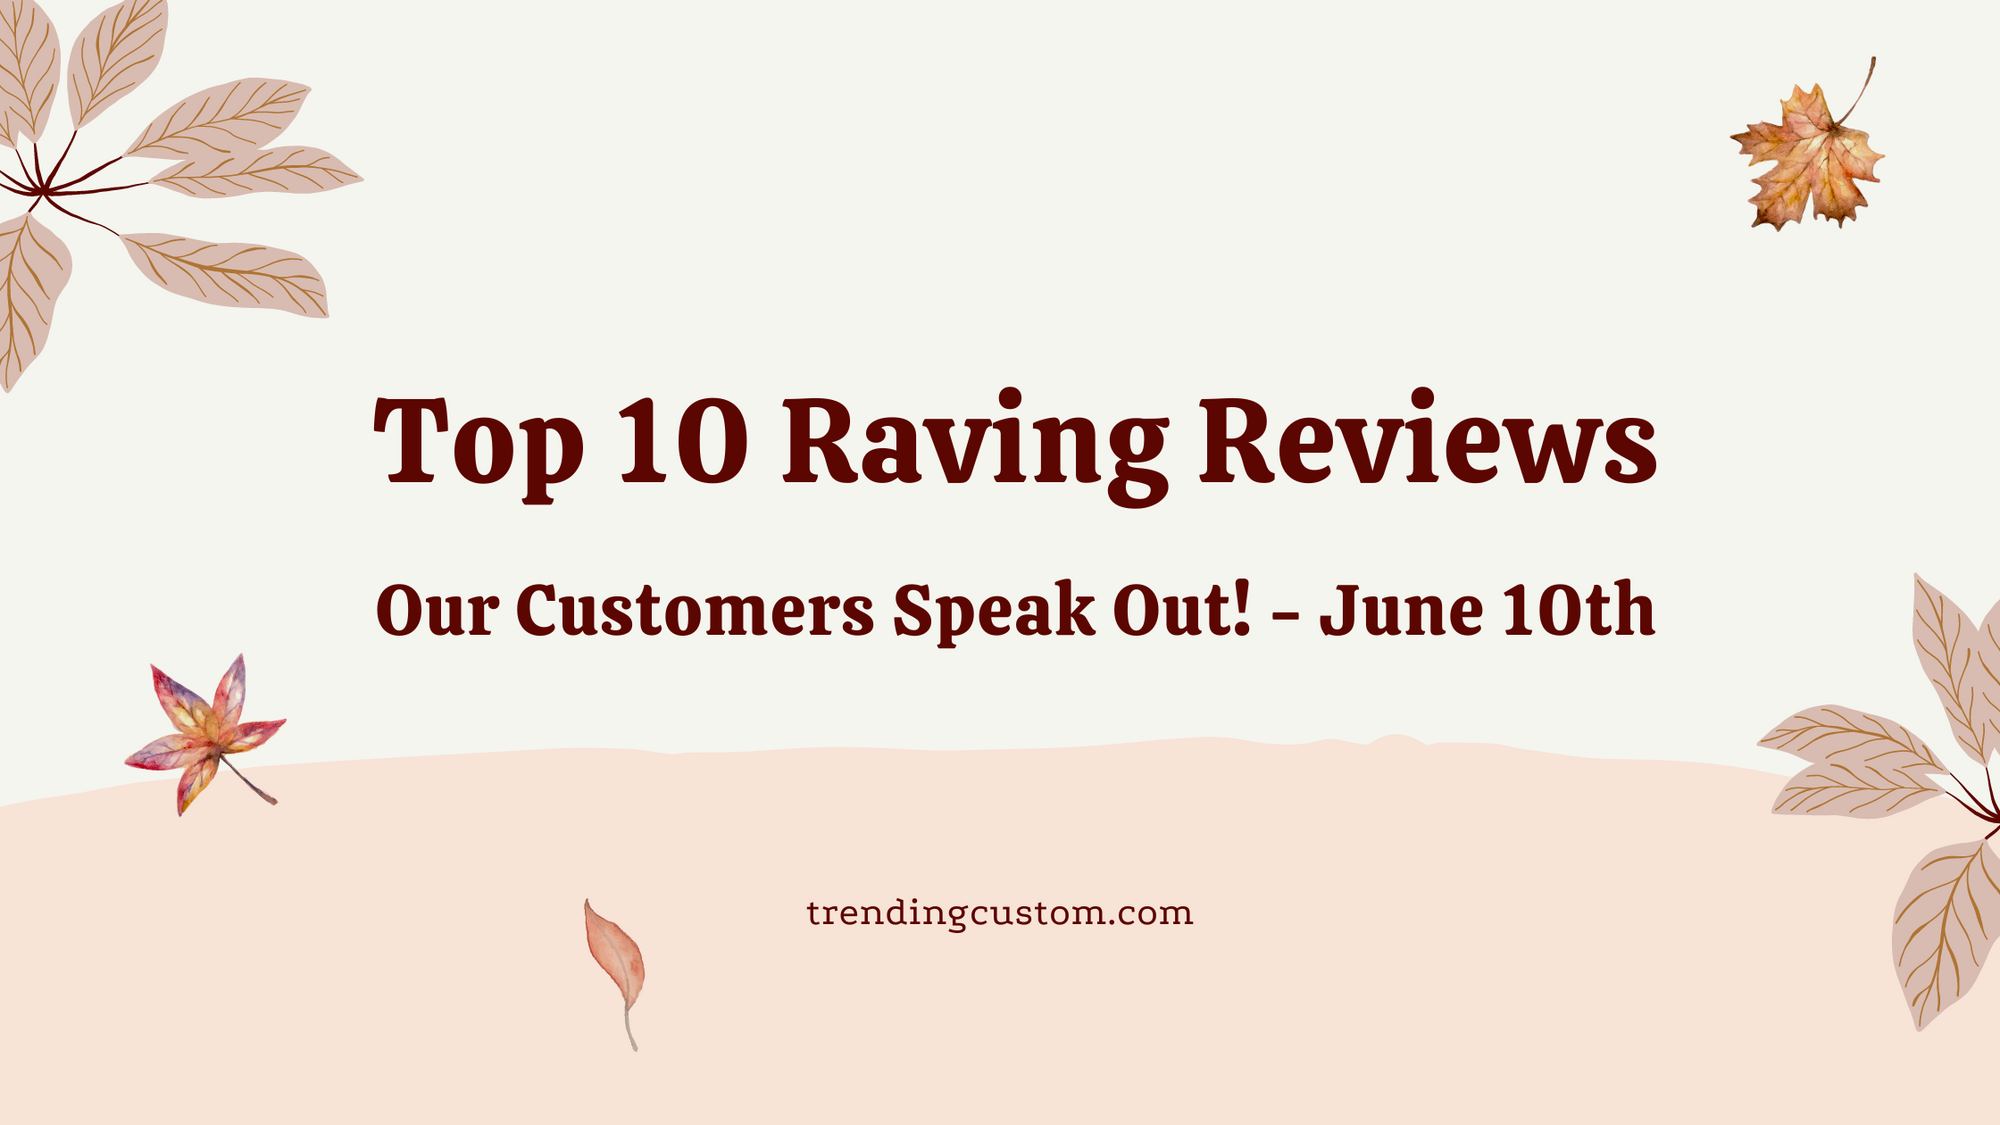 Top 10 Raving Reviews: Our Customers Speak Out! - June 10th